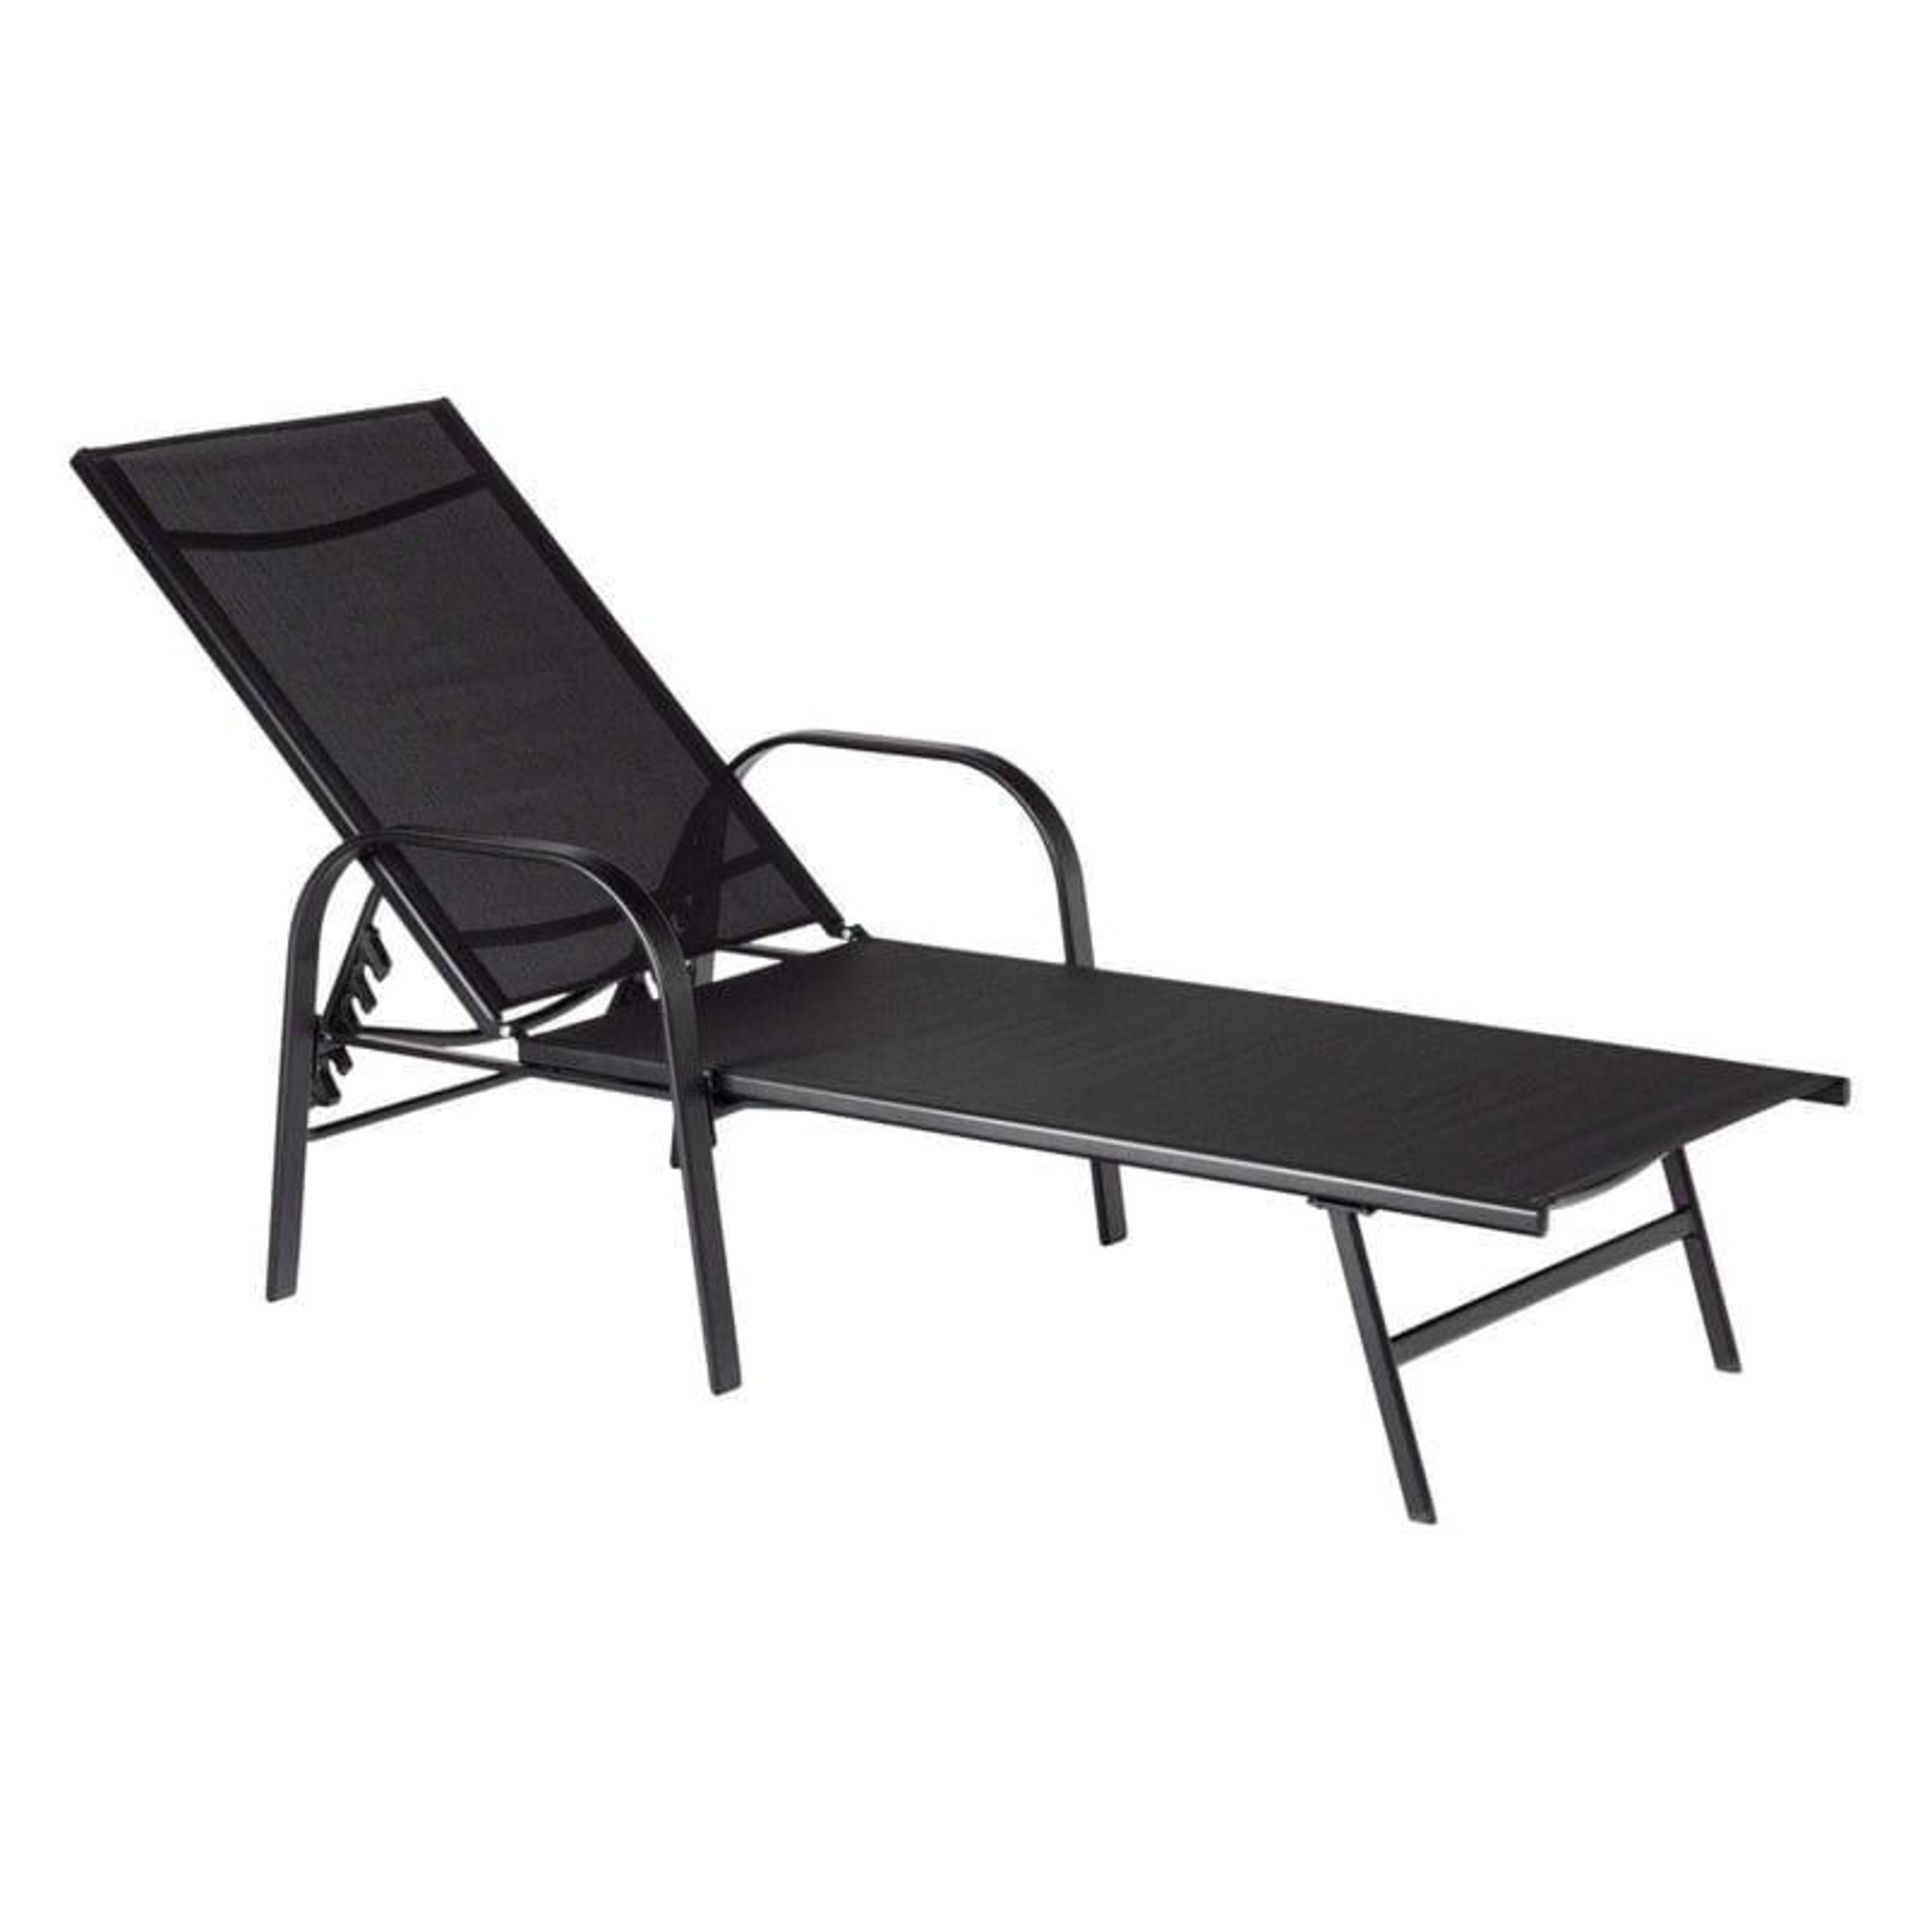 BRAND NEW & BOXED TRADE LOT - 2 X Adjustable Reclining Outdoor Patio Sun Lounger in Black - Image 3 of 7